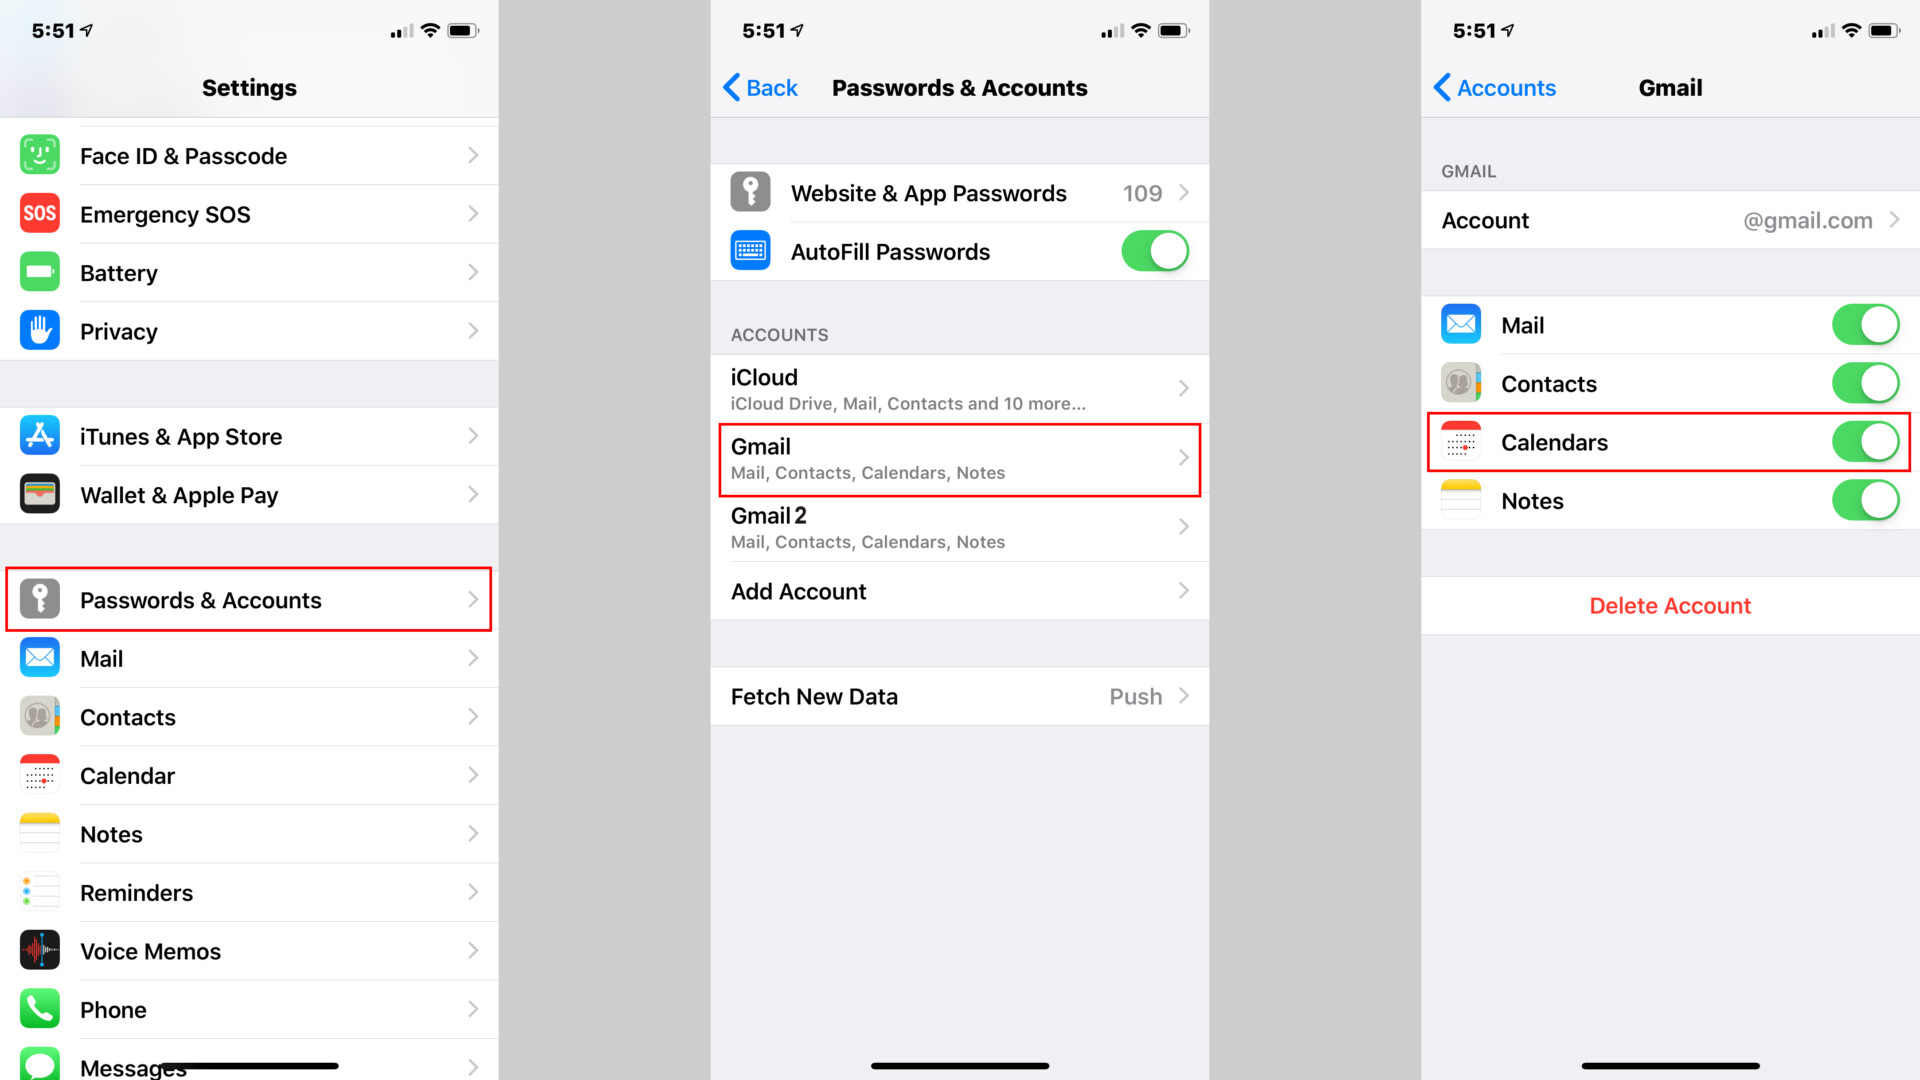 How To Transfer Or Sync Your Calendar From Iphone To Android